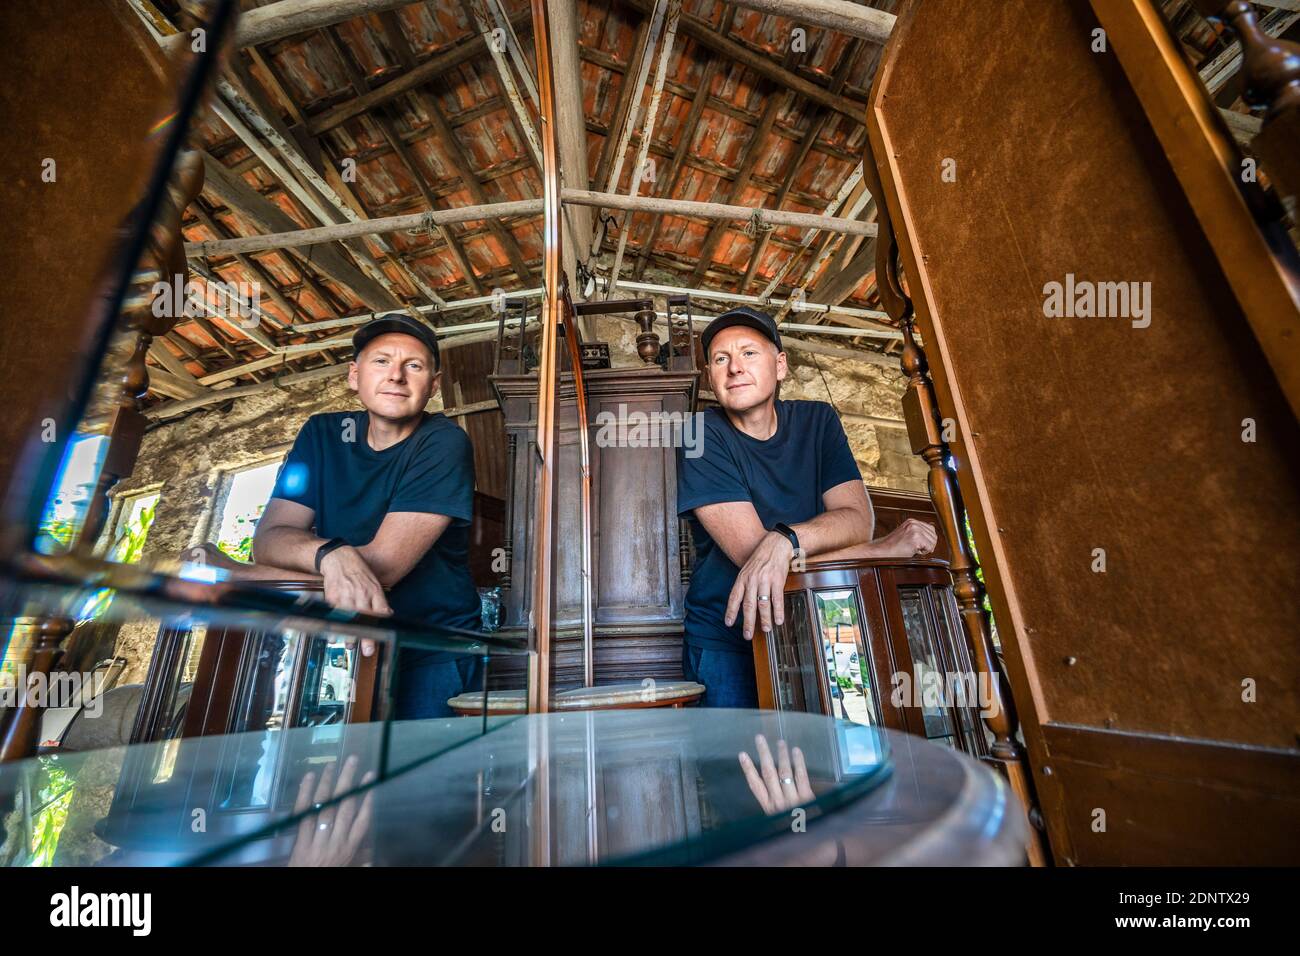 Reflection in the mirror of a man looking into the camera in a storage room full of old wooden furniture Stock Photo